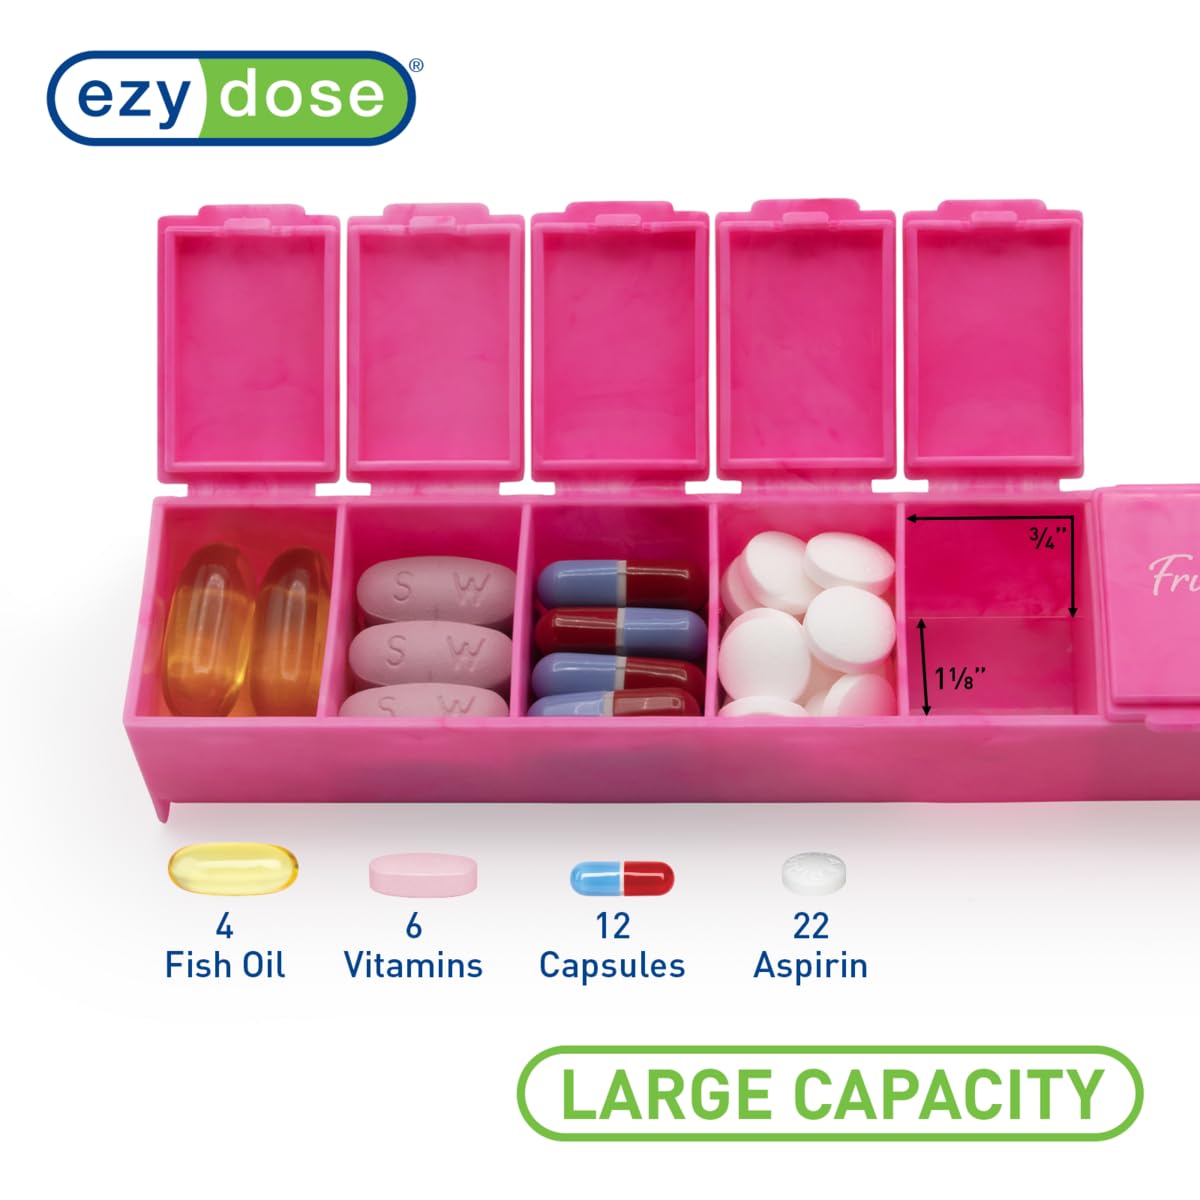 EZY DOSE Weekly (7-Day) Pill Organizer, Vitamin Planner, and Medicine Box, Large Compartments, Pink, Made in The USA